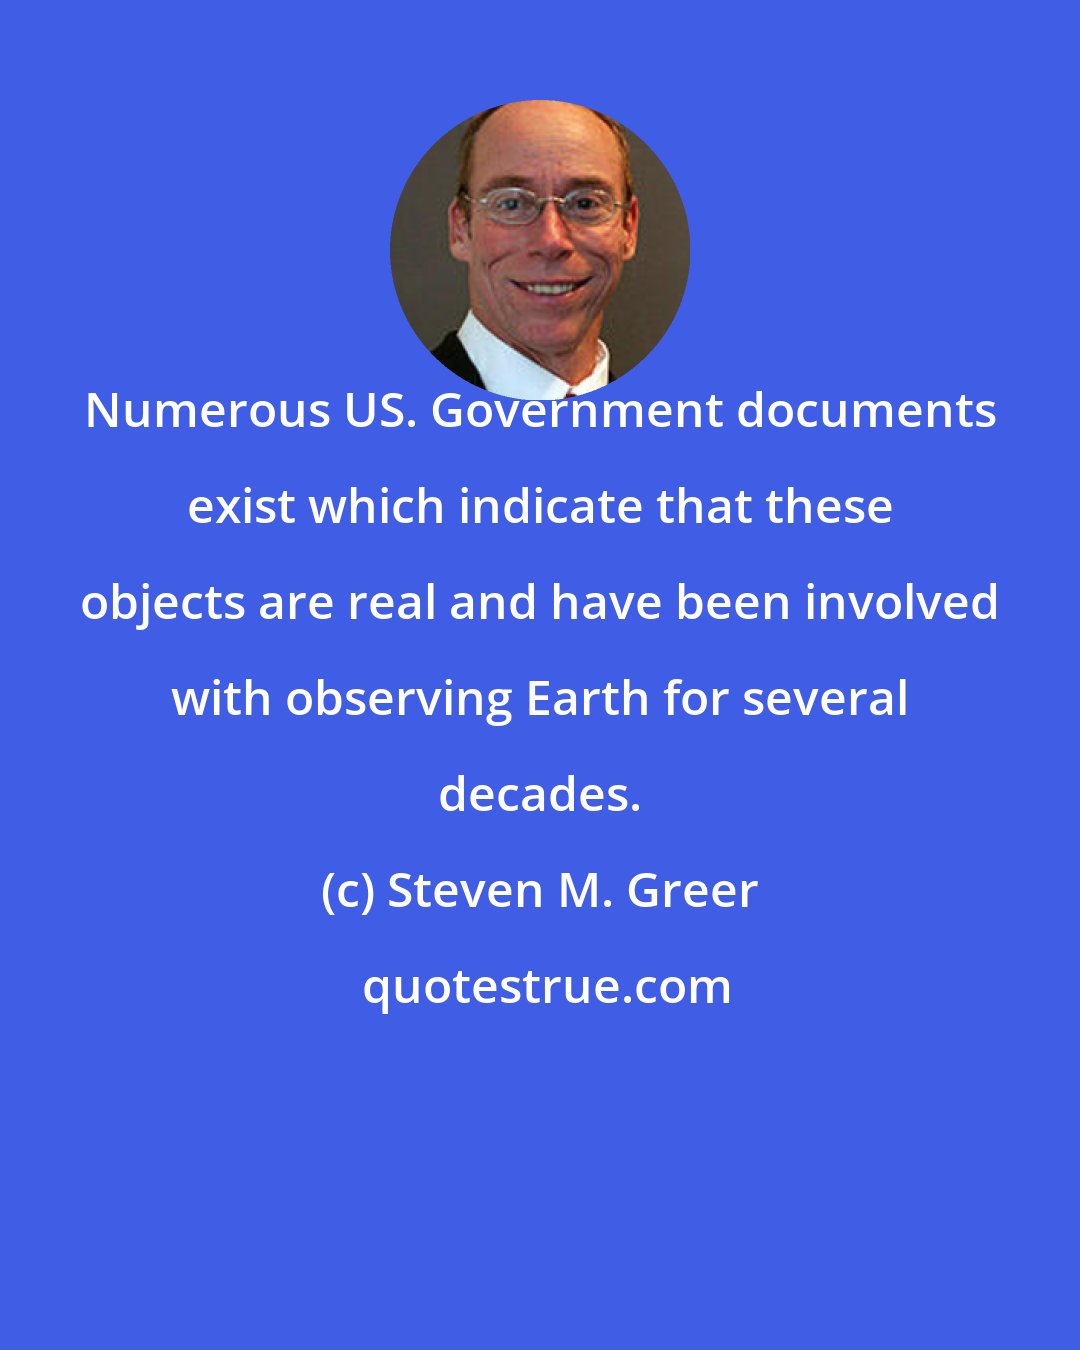 Steven M. Greer: Numerous US. Government documents exist which indicate that these objects are real and have been involved with observing Earth for several decades.